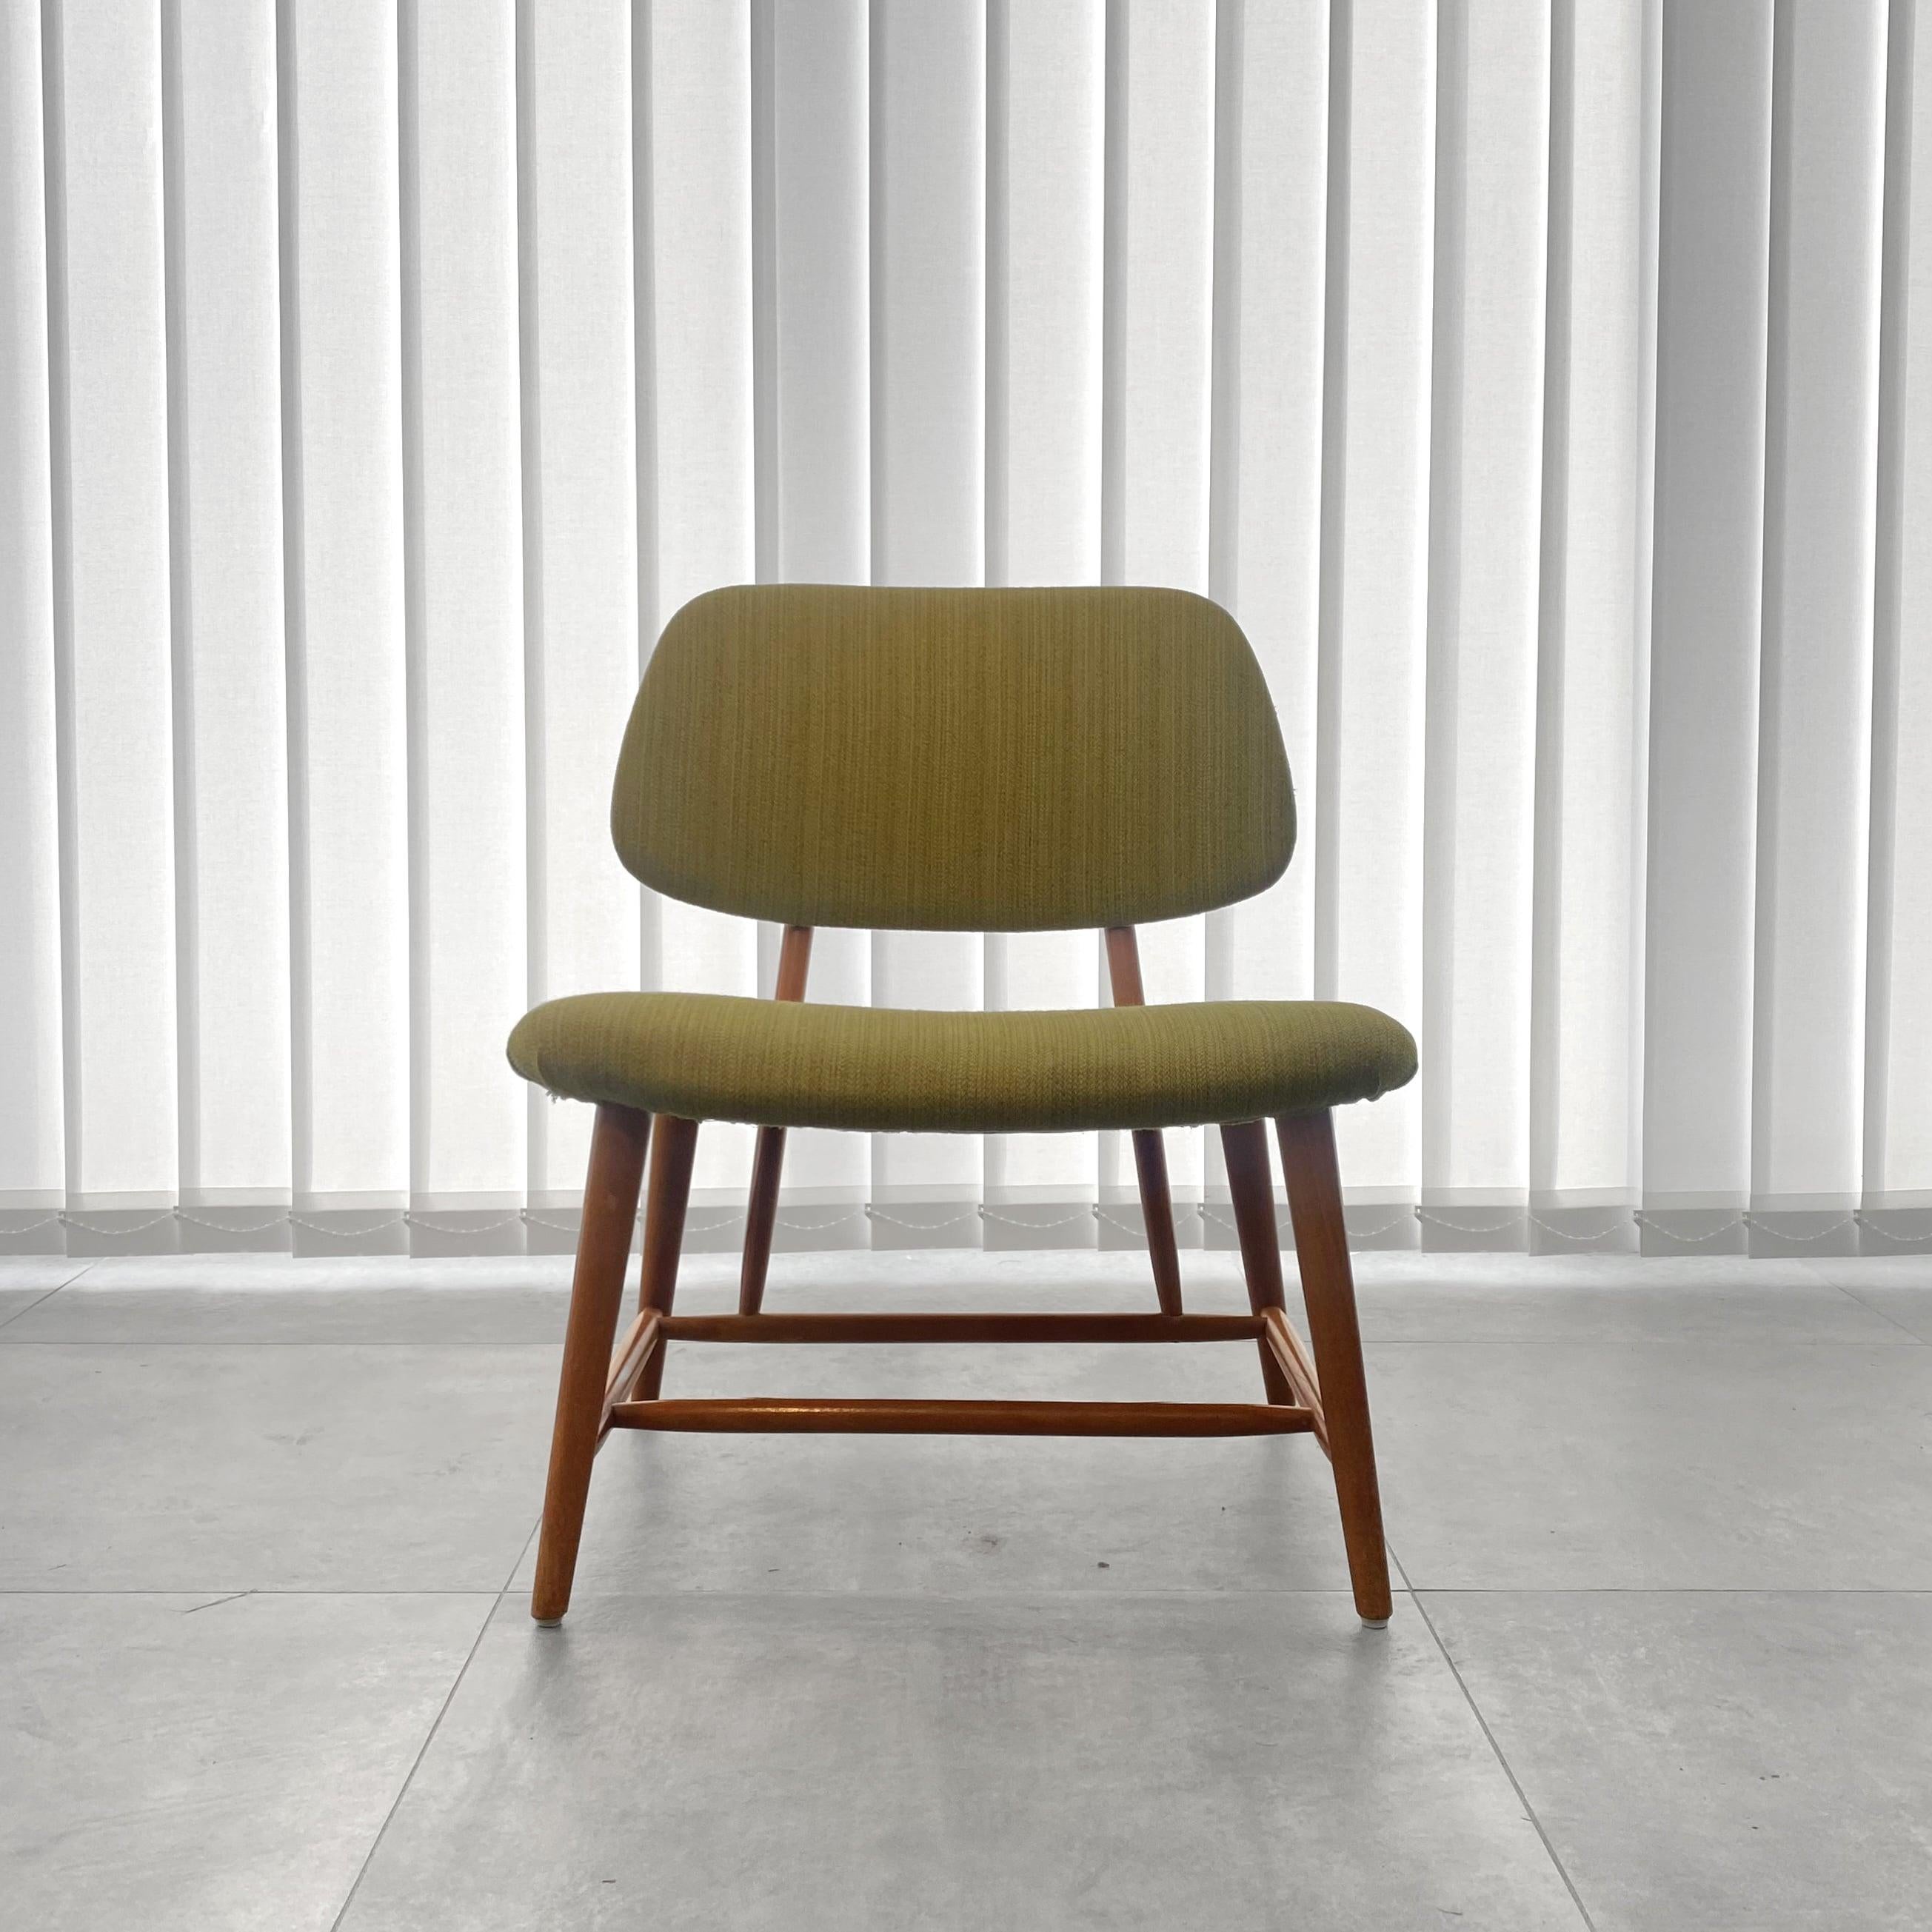 Mid-20th Century Swedish TeVe chair by Alf Svensson for Ljungs Industrier, Dux, 1950s For Sale